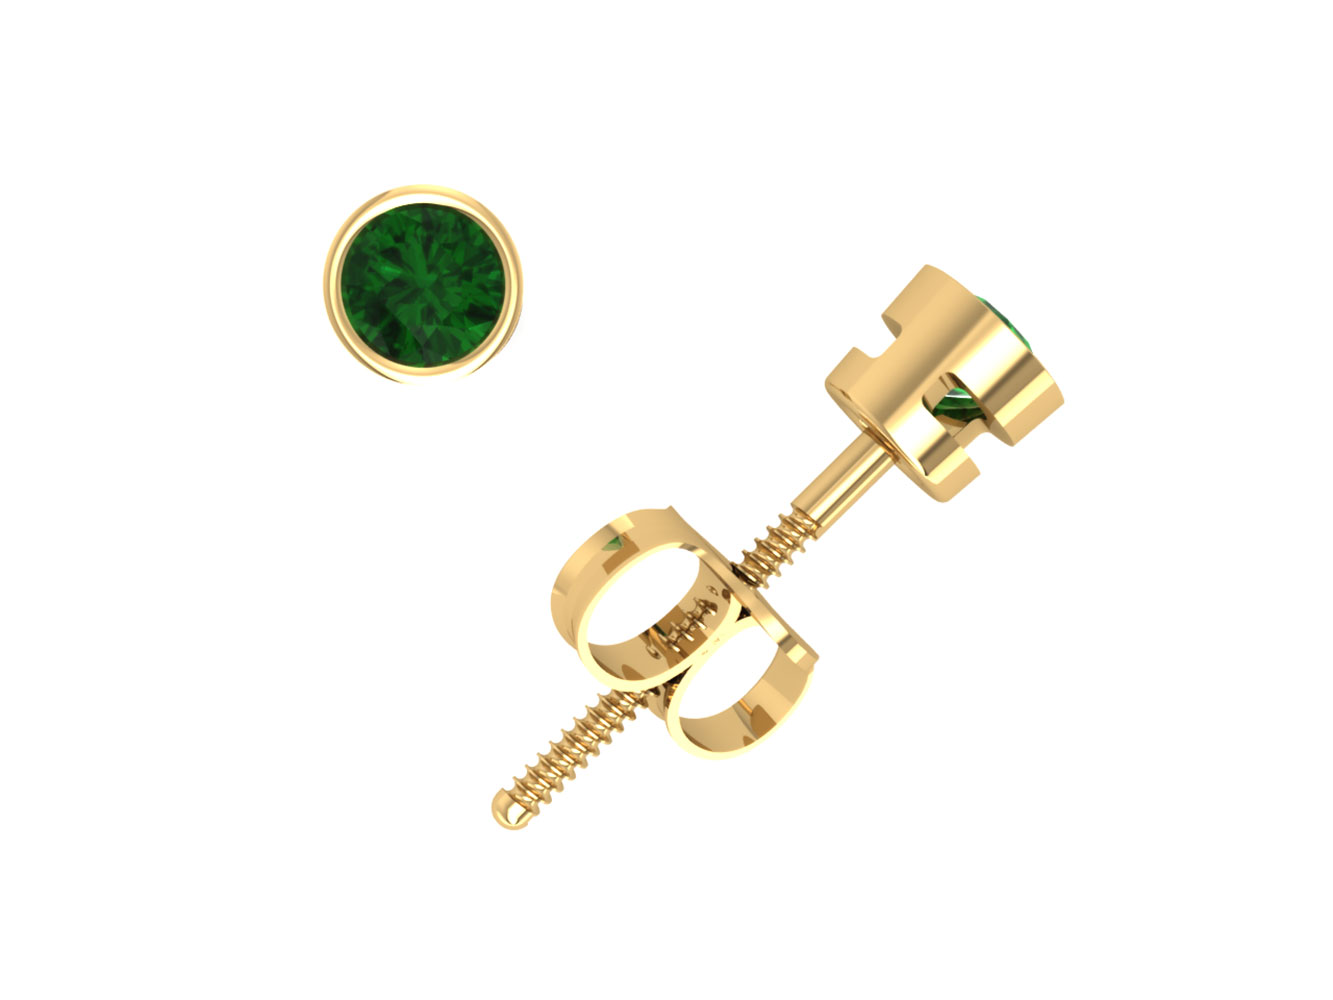 Jewel We Sell Genuine 0.10Ct Round Emerald Solitaire Stud Earrings 14k White or Yellow Gold Bezel AAA Quality